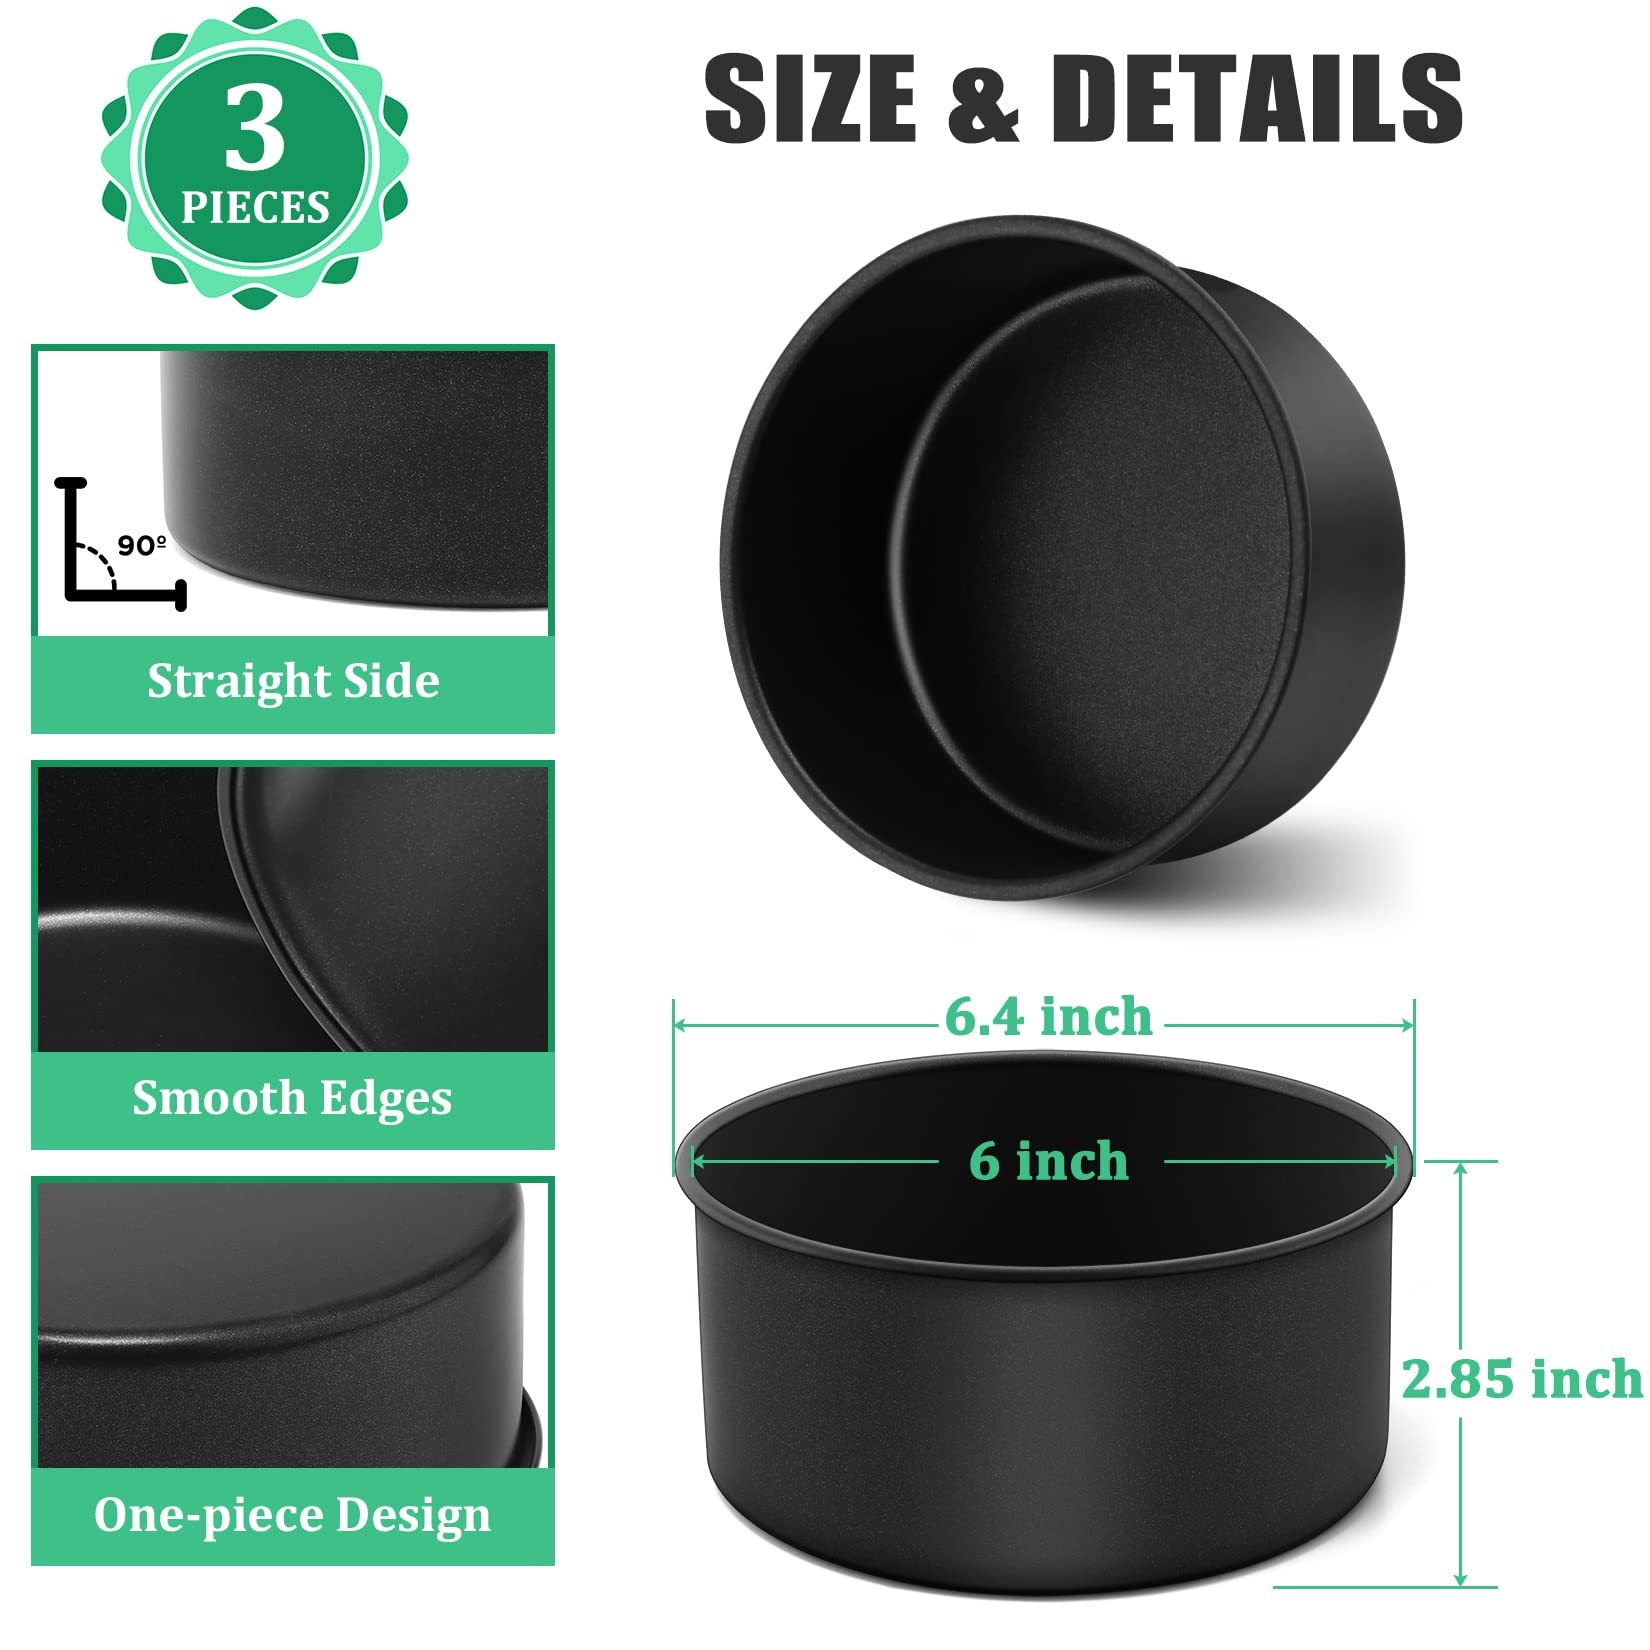 P&P CHEF Non-stick 6 Inch Cake Pan Set of 3, Round Cake Pans Tins for Small Layered Cake, 3 Inch Depth & One-piece Design, Stainless Steel Core & Healthy Coatings, Black